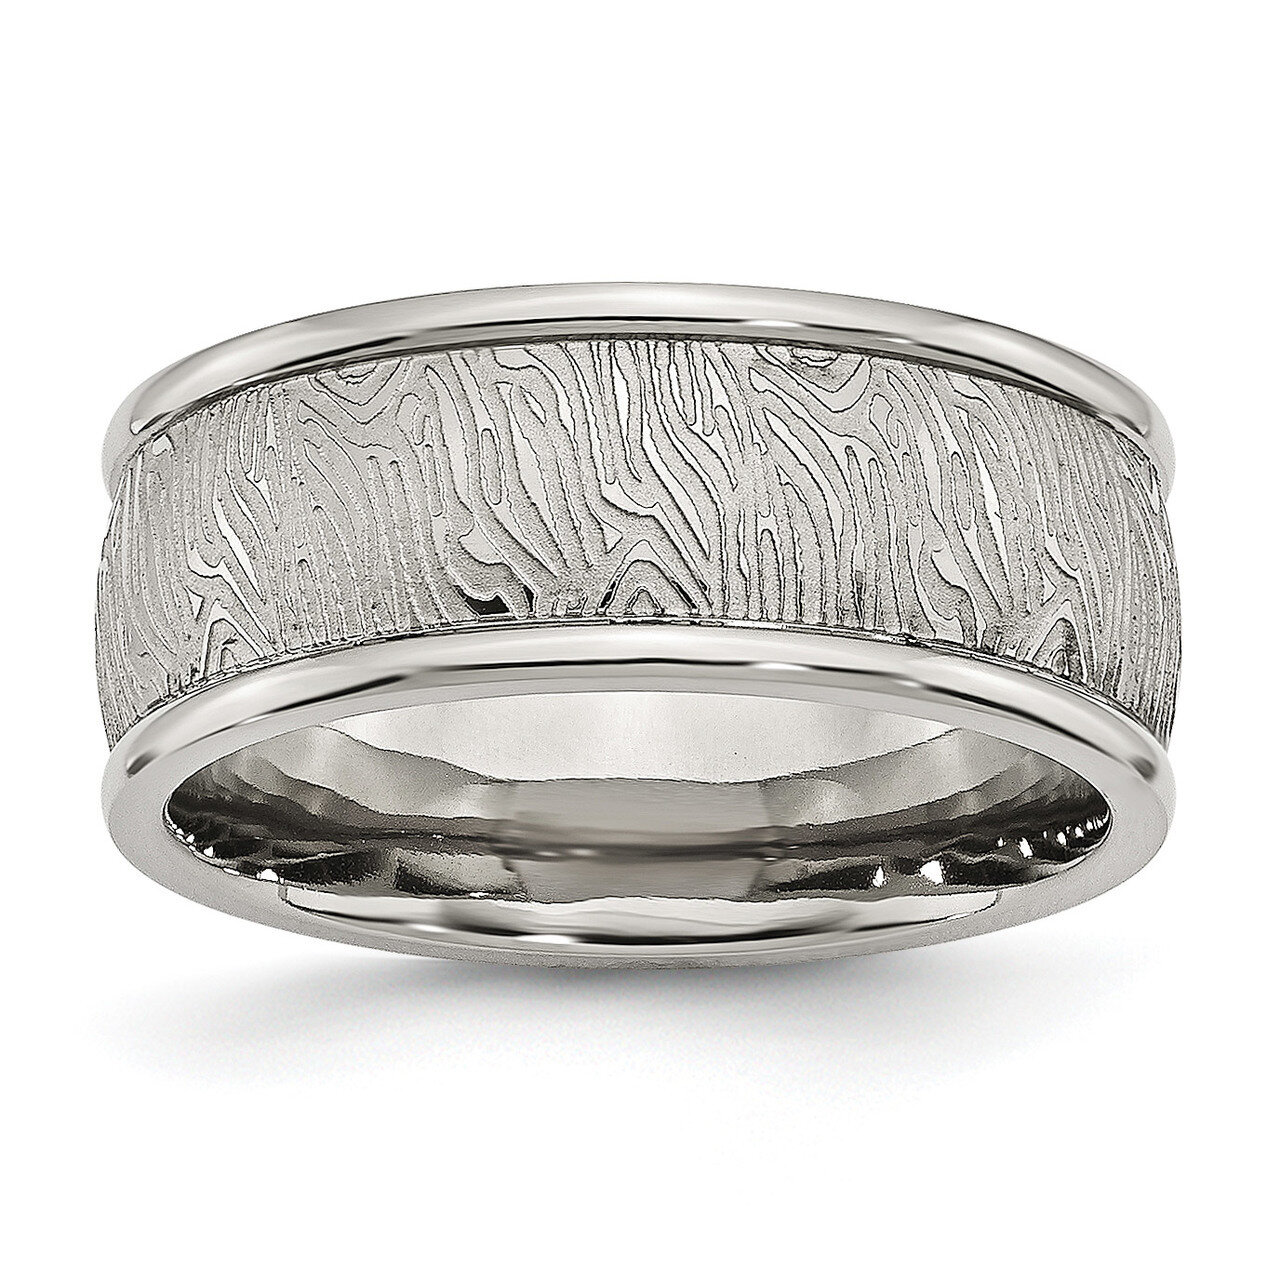 9mm Textured Rounded Edge Ring Stainless Steel Polished SR395